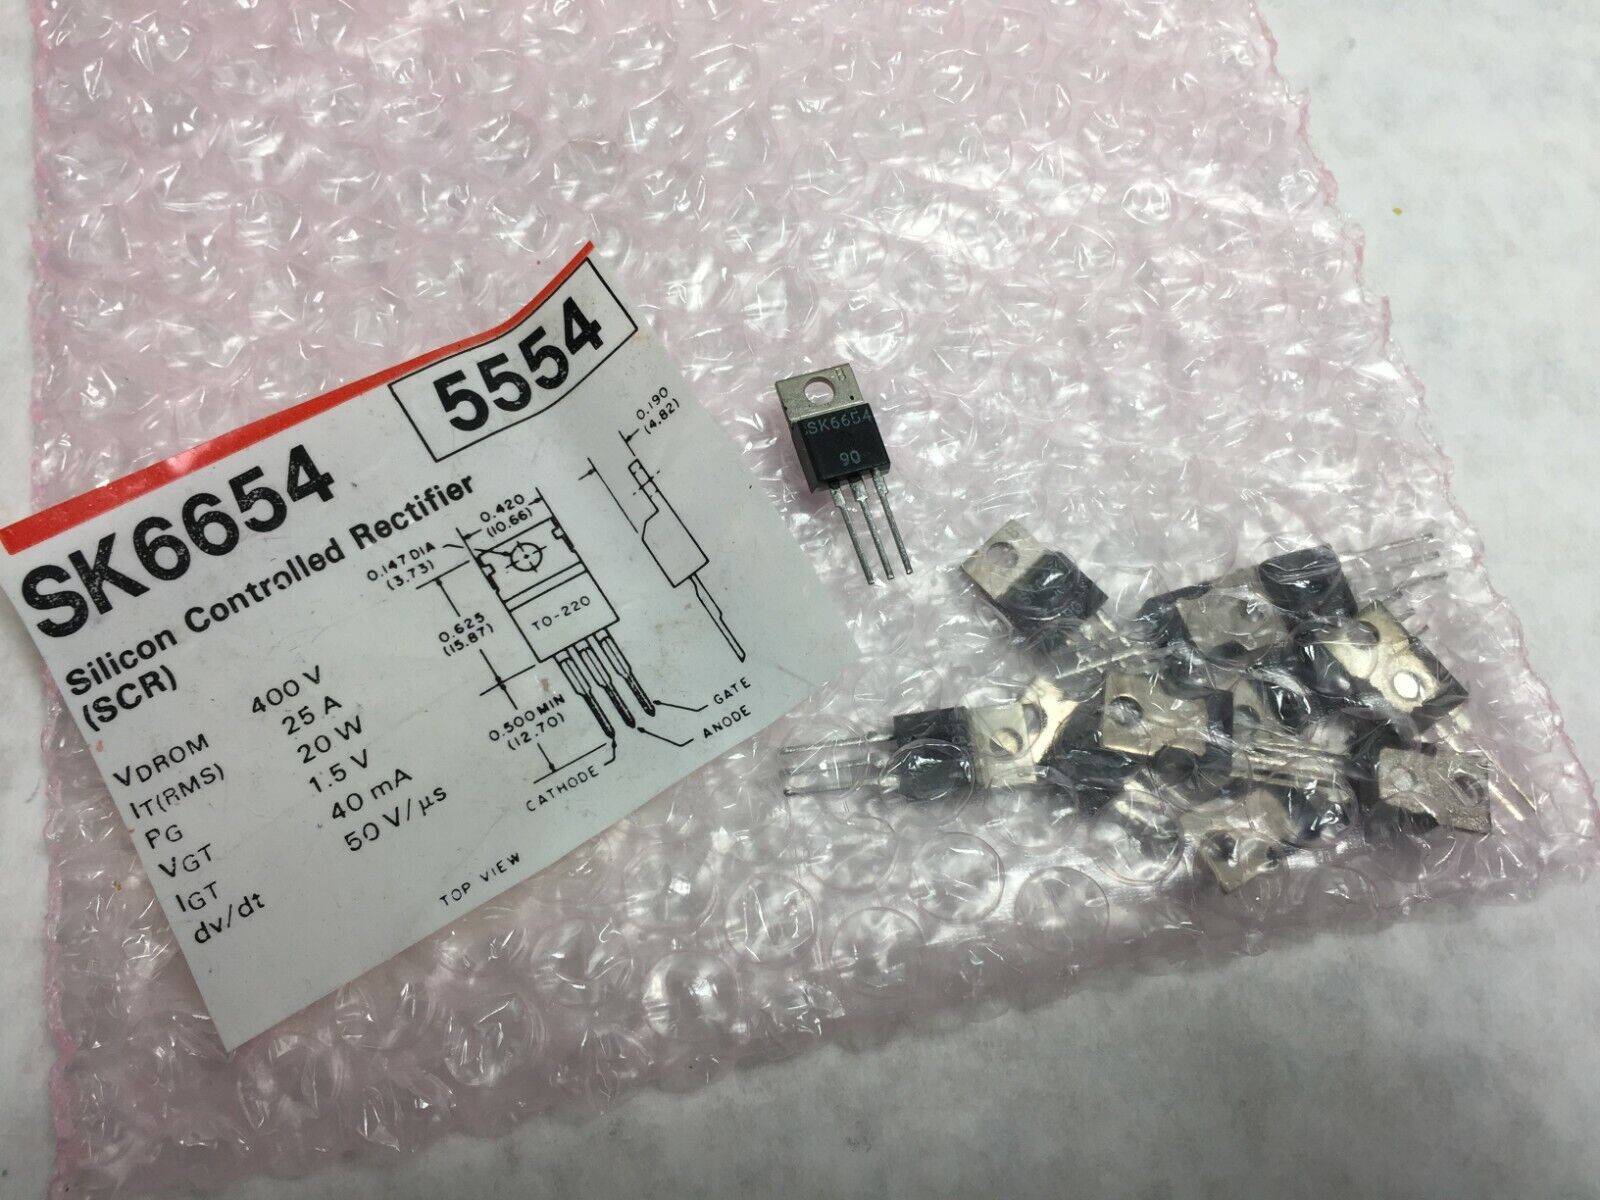 NOS  SK6654 Silicon Controlled Rectifier  Lot of 11